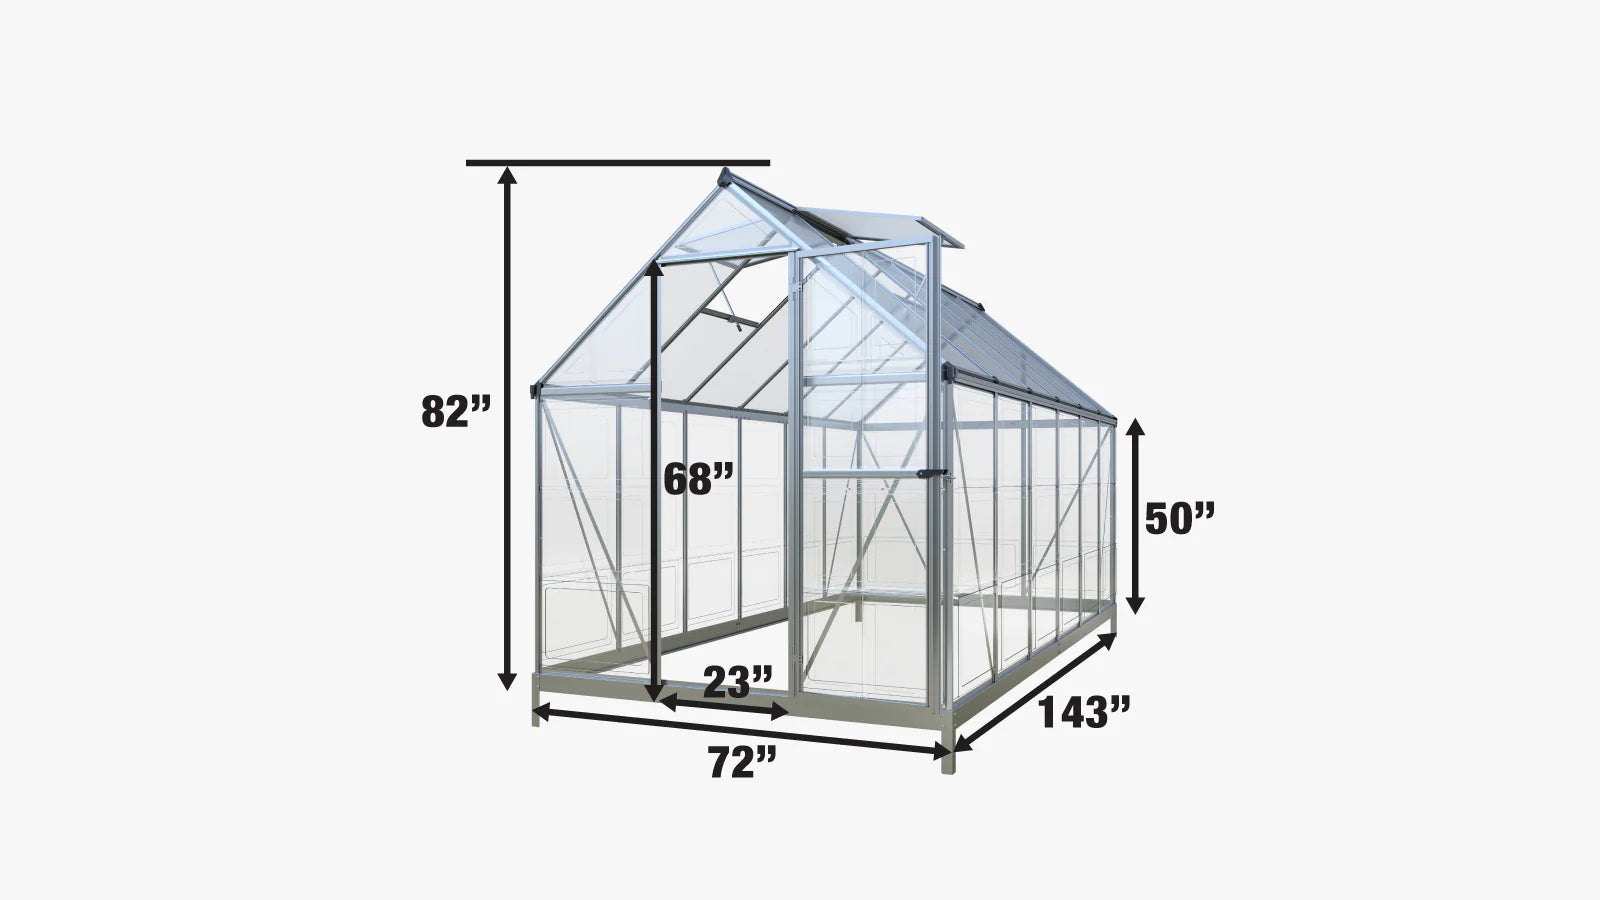 TMG Industrial 6’ x 12’ Crystal Clear Greenhouse, Aluminum Frame, Integrated Gutter System, Roof Vents, TMG-GH612-specifications-image